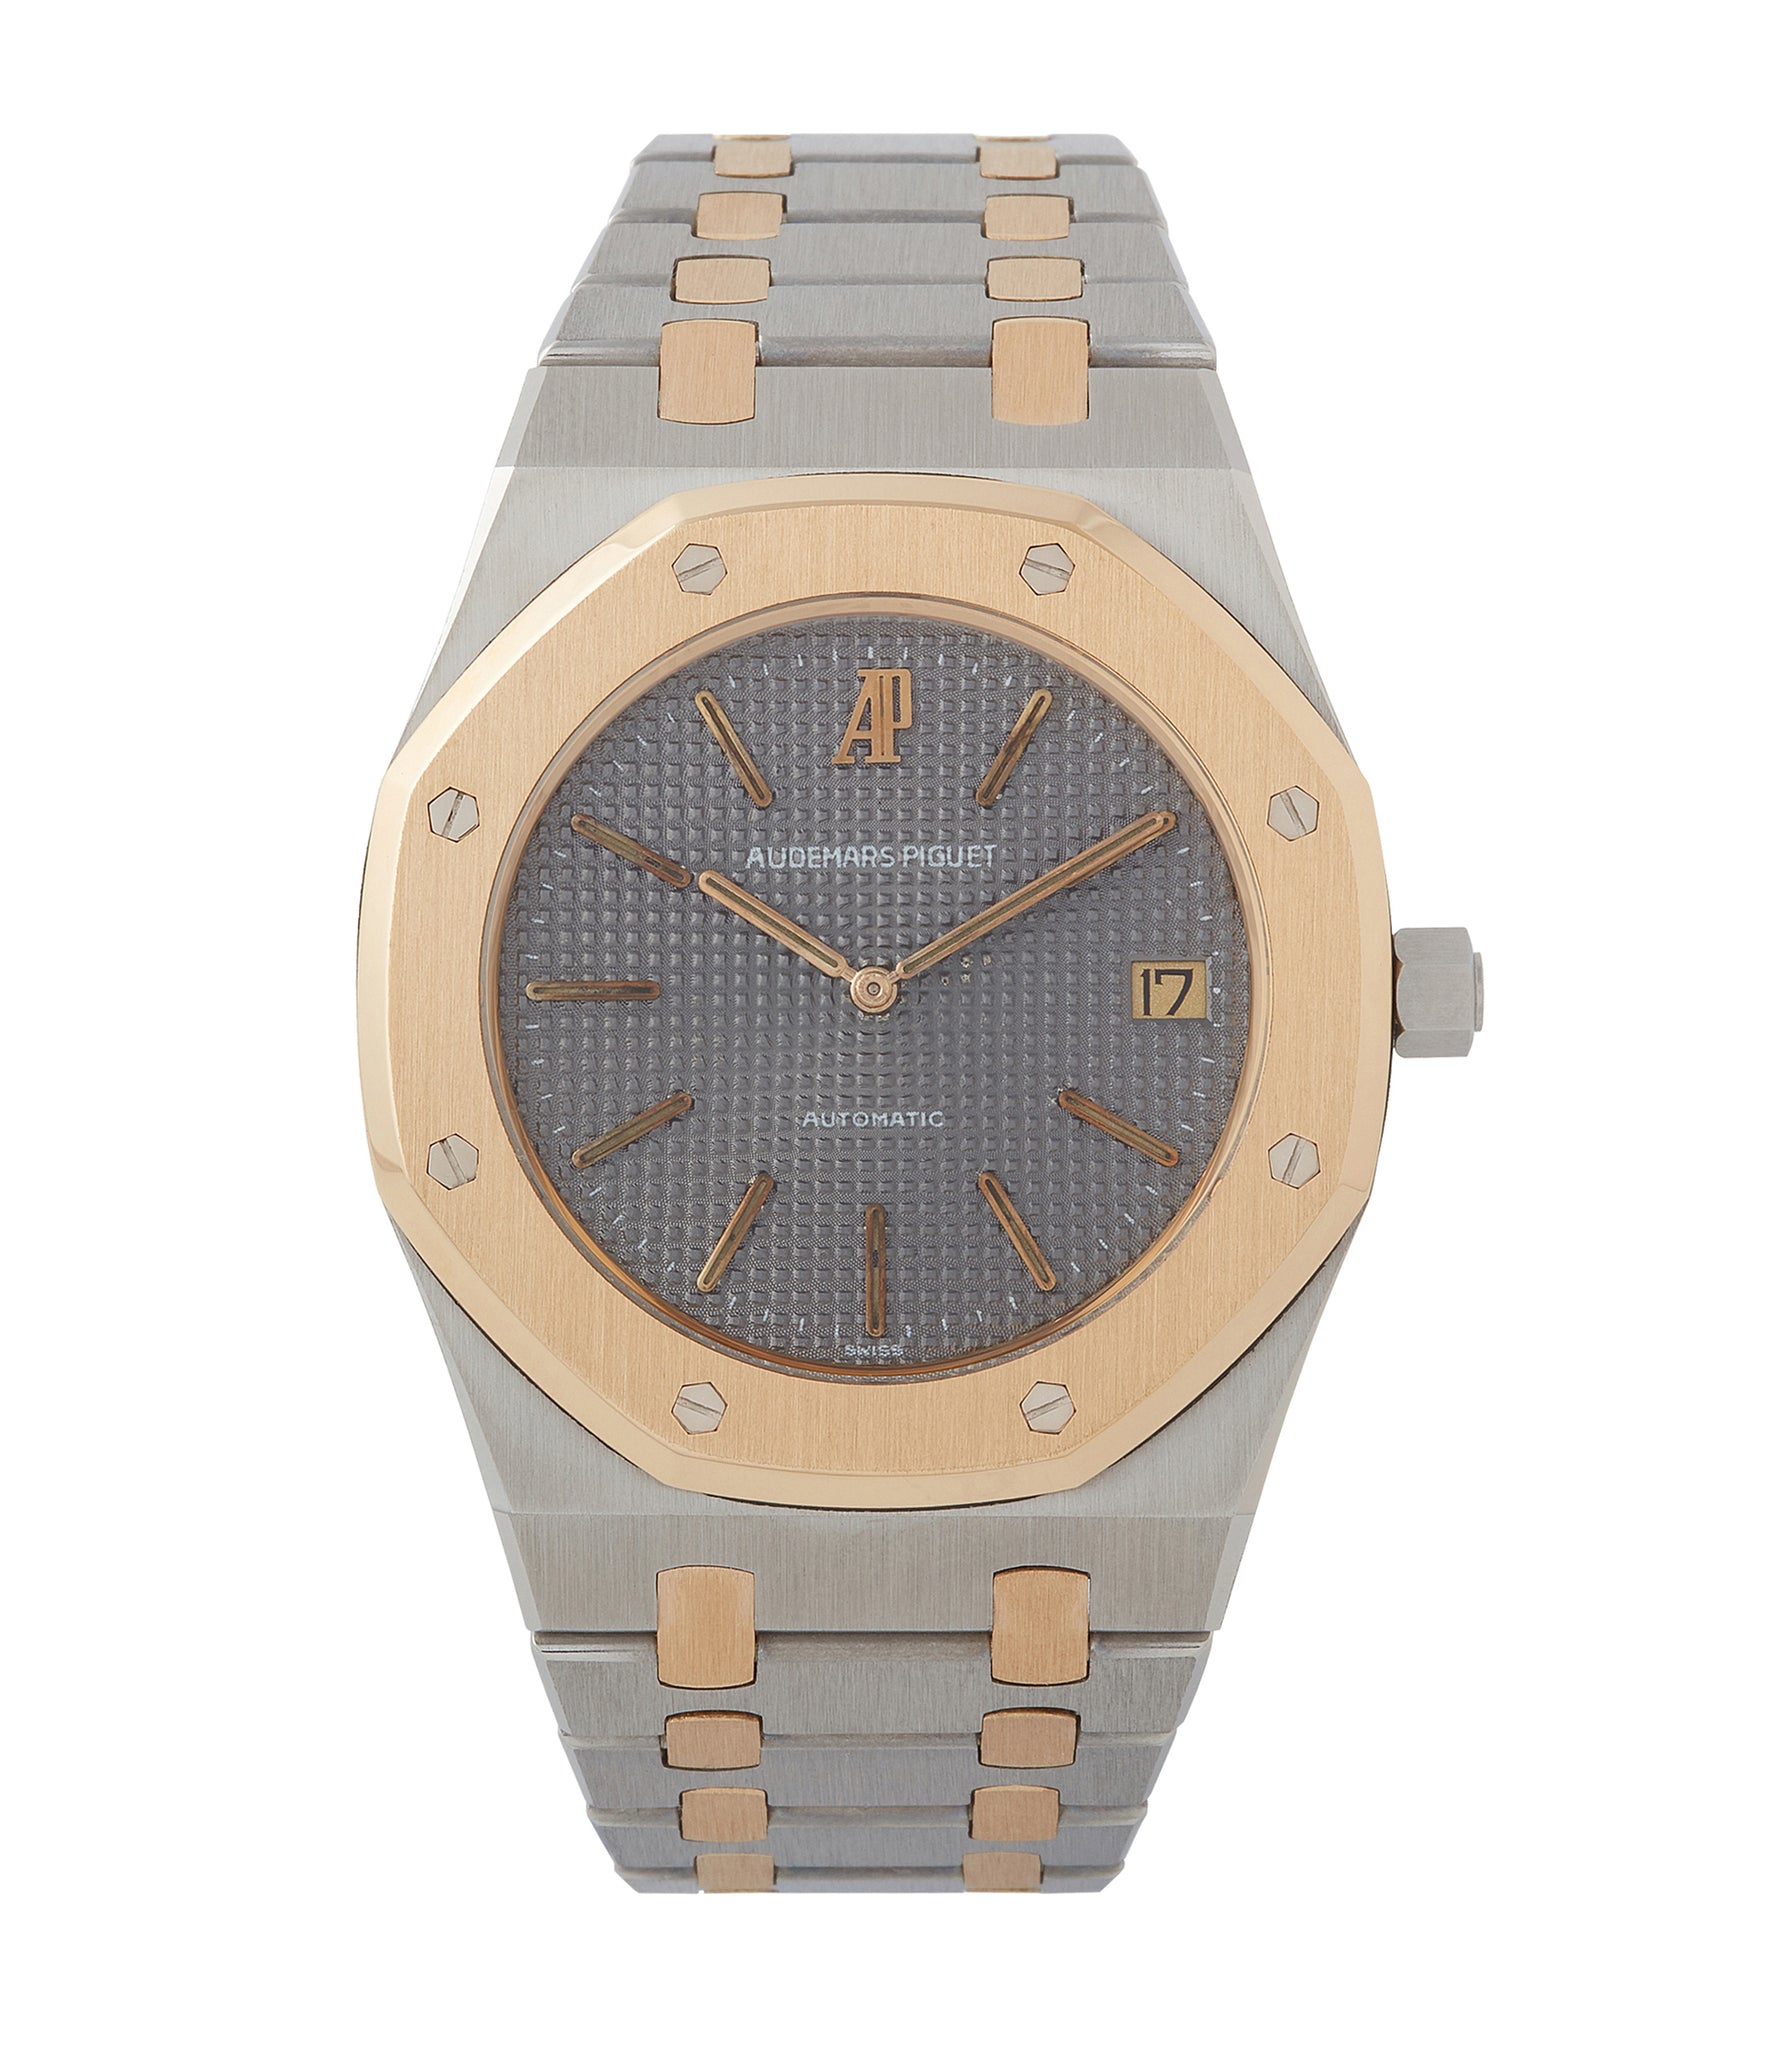 buy vintage Audemars Piguet Royal Oak 5402SA steel gold bi-metal sports watch for sale online at A Collected Man London UK specialist of rare watches